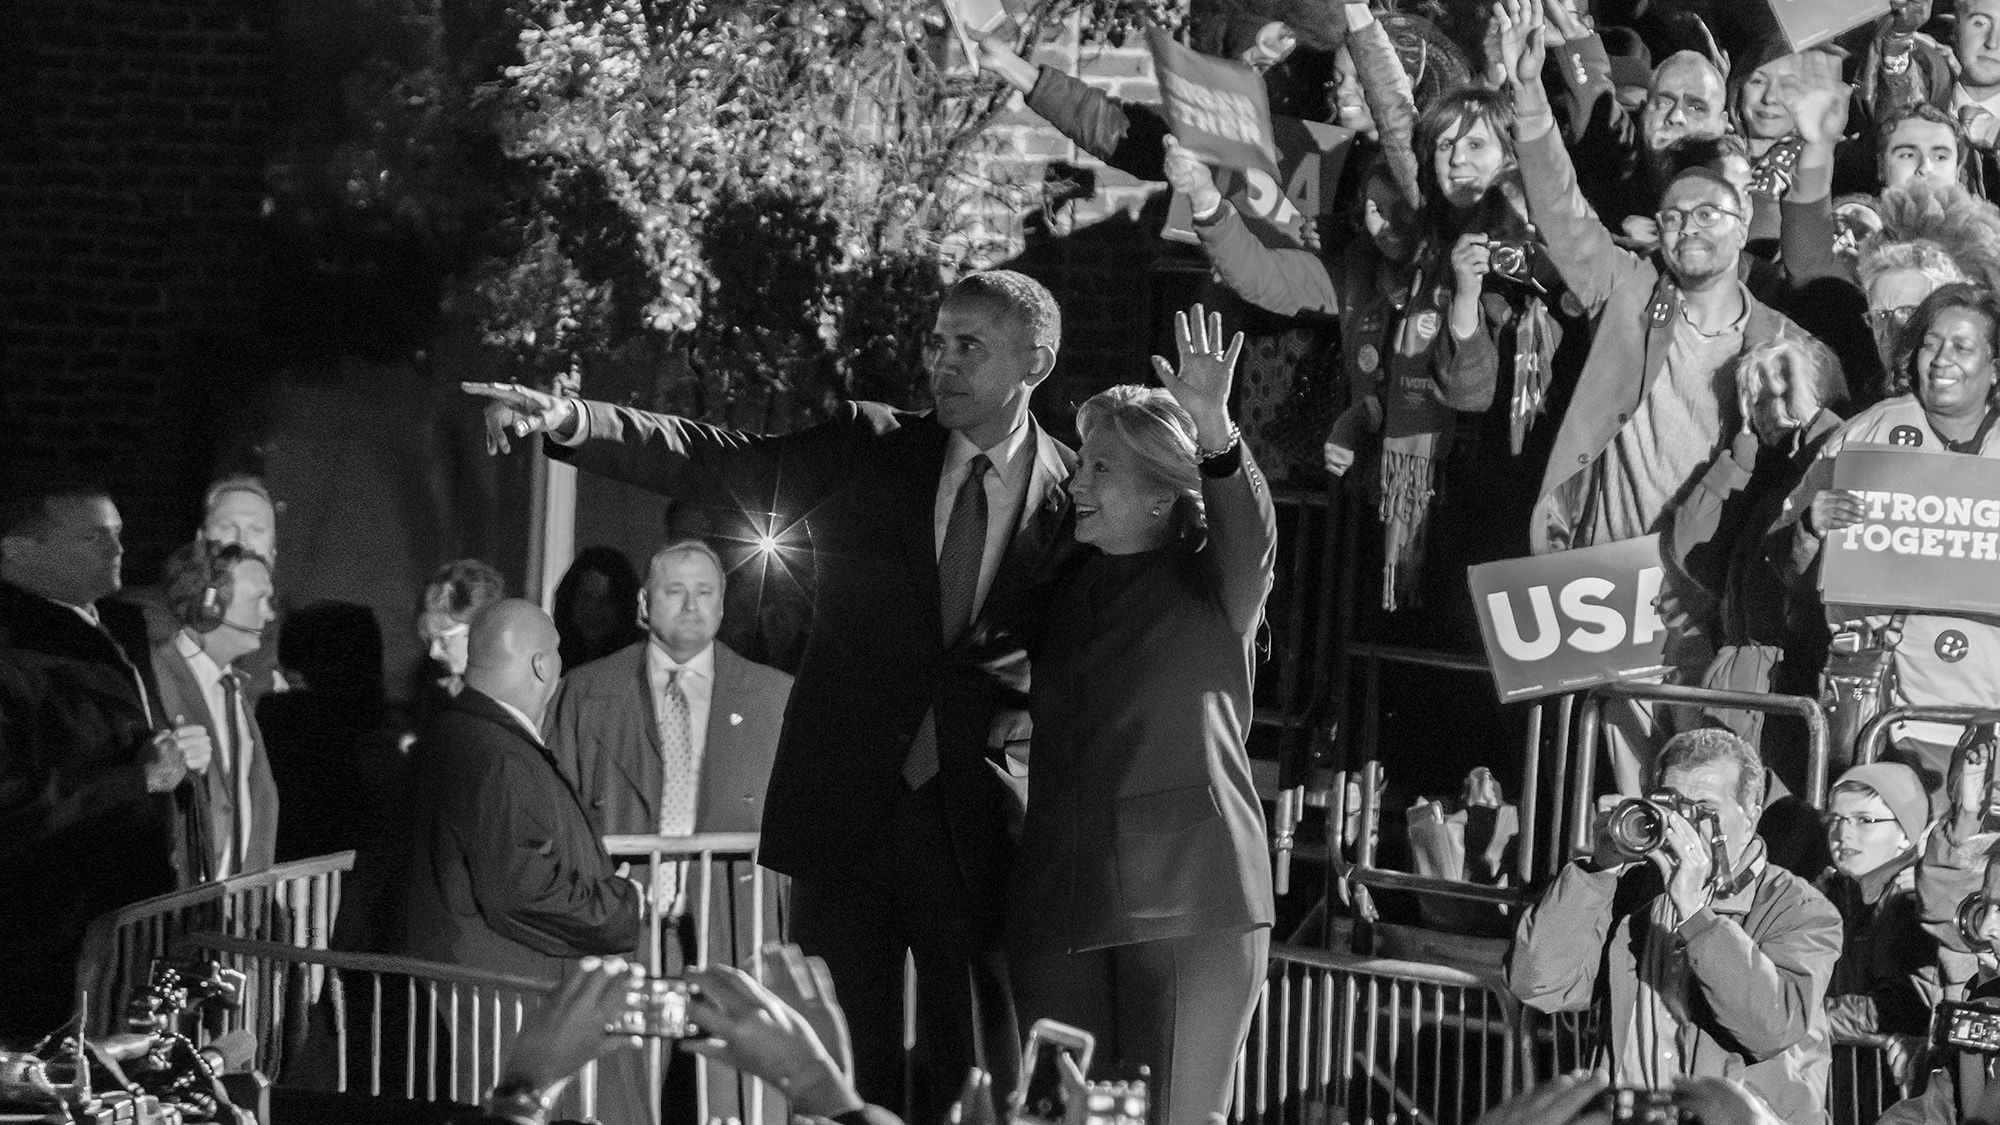 Barack Obama, Hilary Clinton at a rally together.